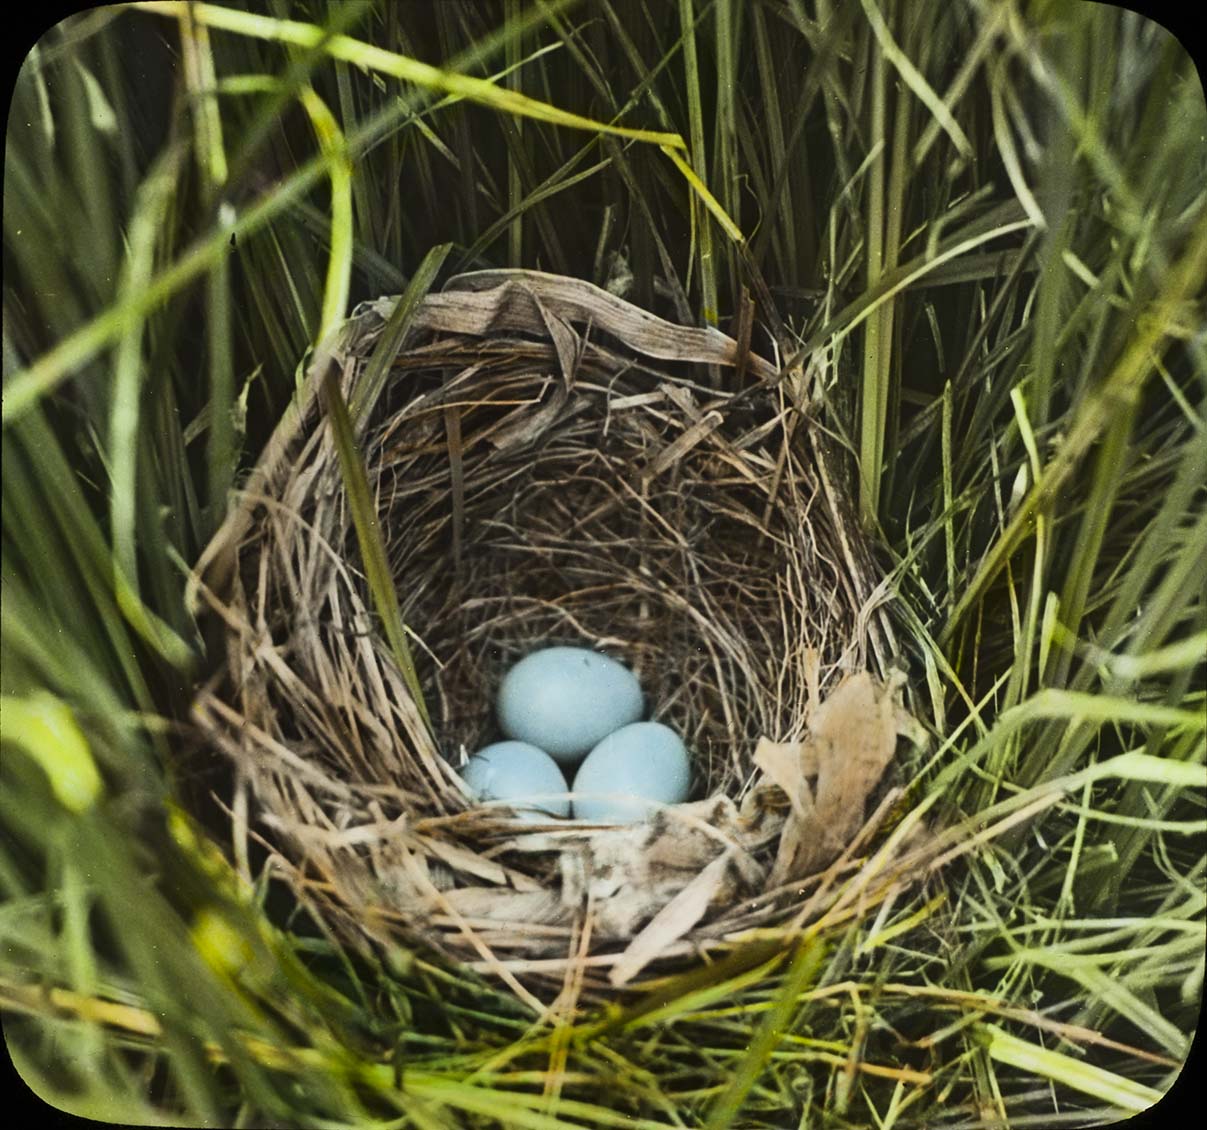 Lantern slide and photograph of eggs in a Dickcissel nest